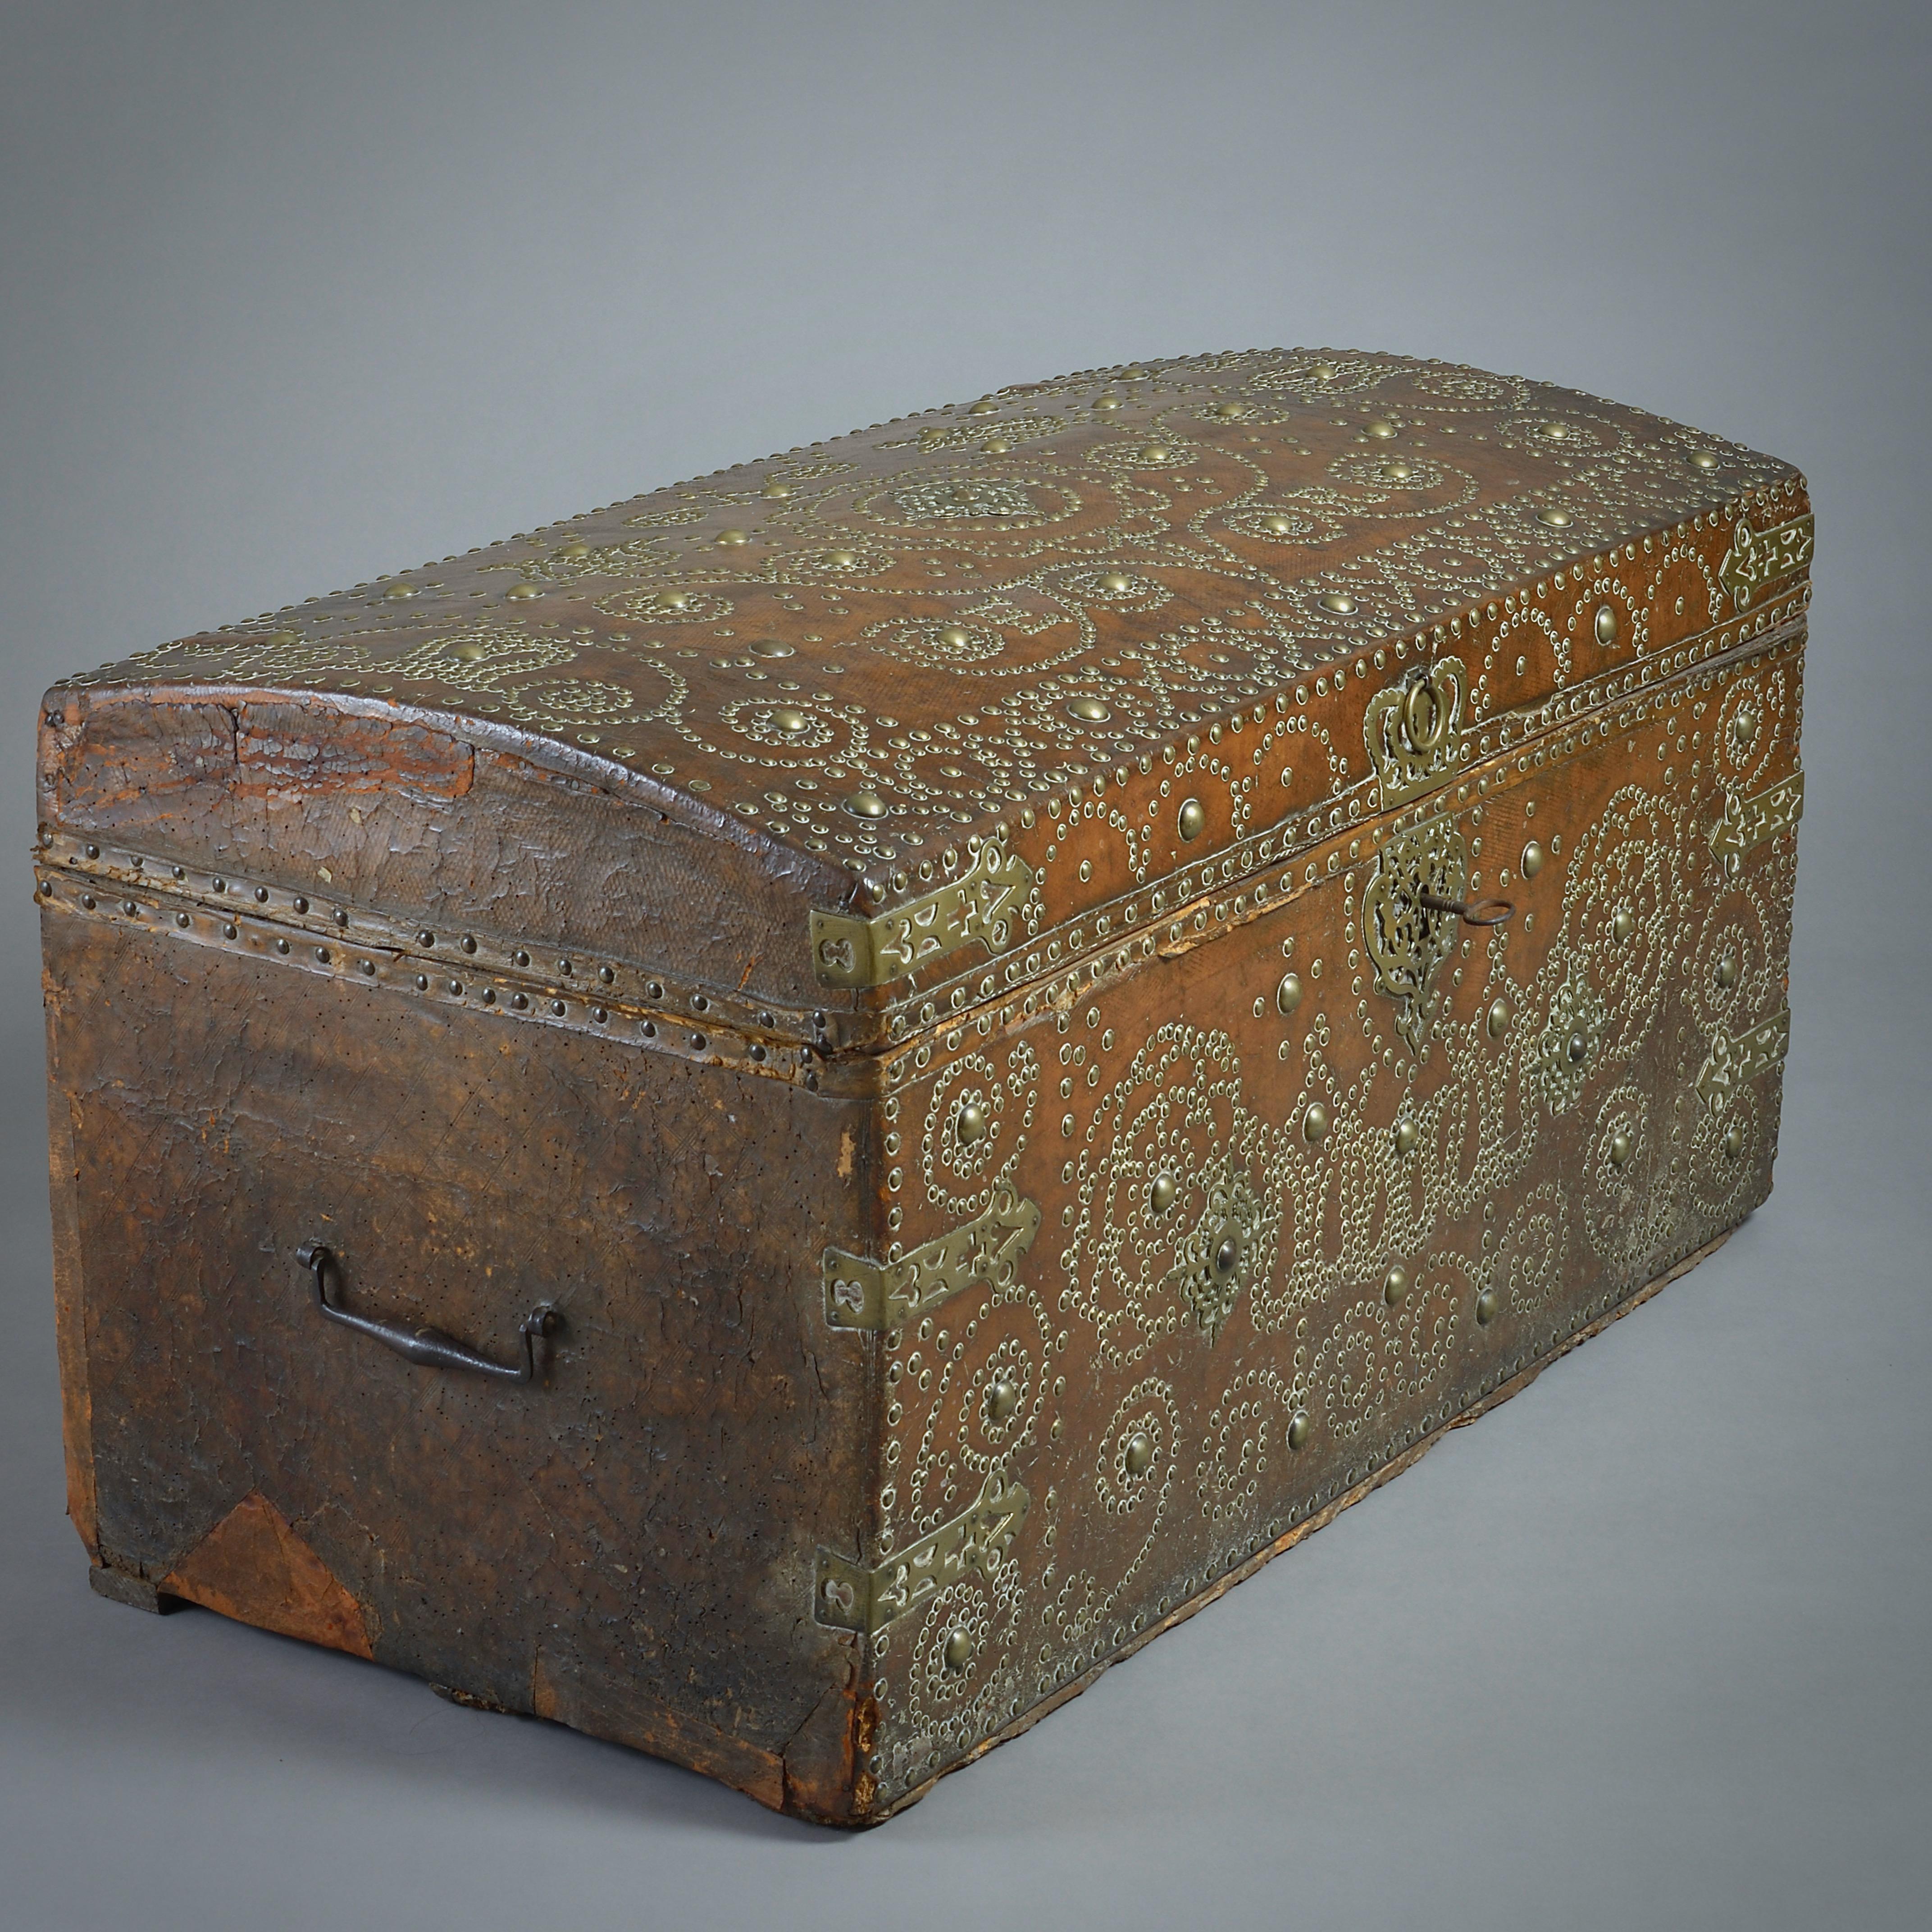 A FINE GEORGE II BRASS-STUDDED LEATHER TRUNK BY HENRY NICKLES, CIRCA 1730.

Geometrically decorated with brass studs, a crown, and a pierced lock plate. Initialled ER. The interior with original marbled paper labelled Henry Nickles Trunk-Maker at ye